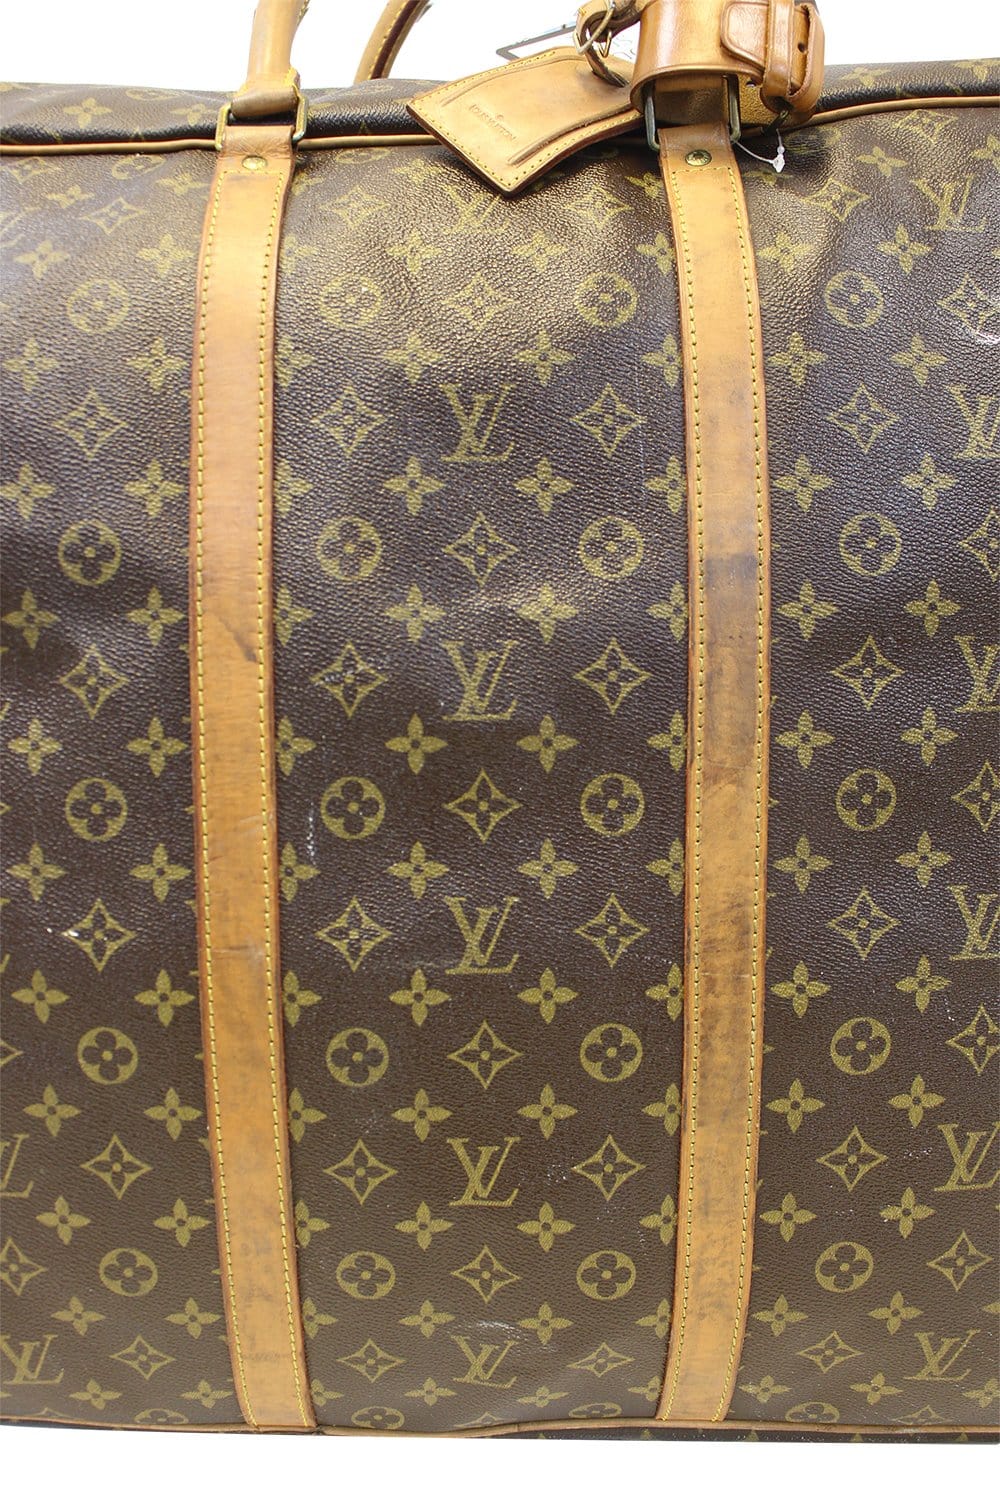 Vintage Louis Vuitton Carry All Soft Side Suitcase Weekender